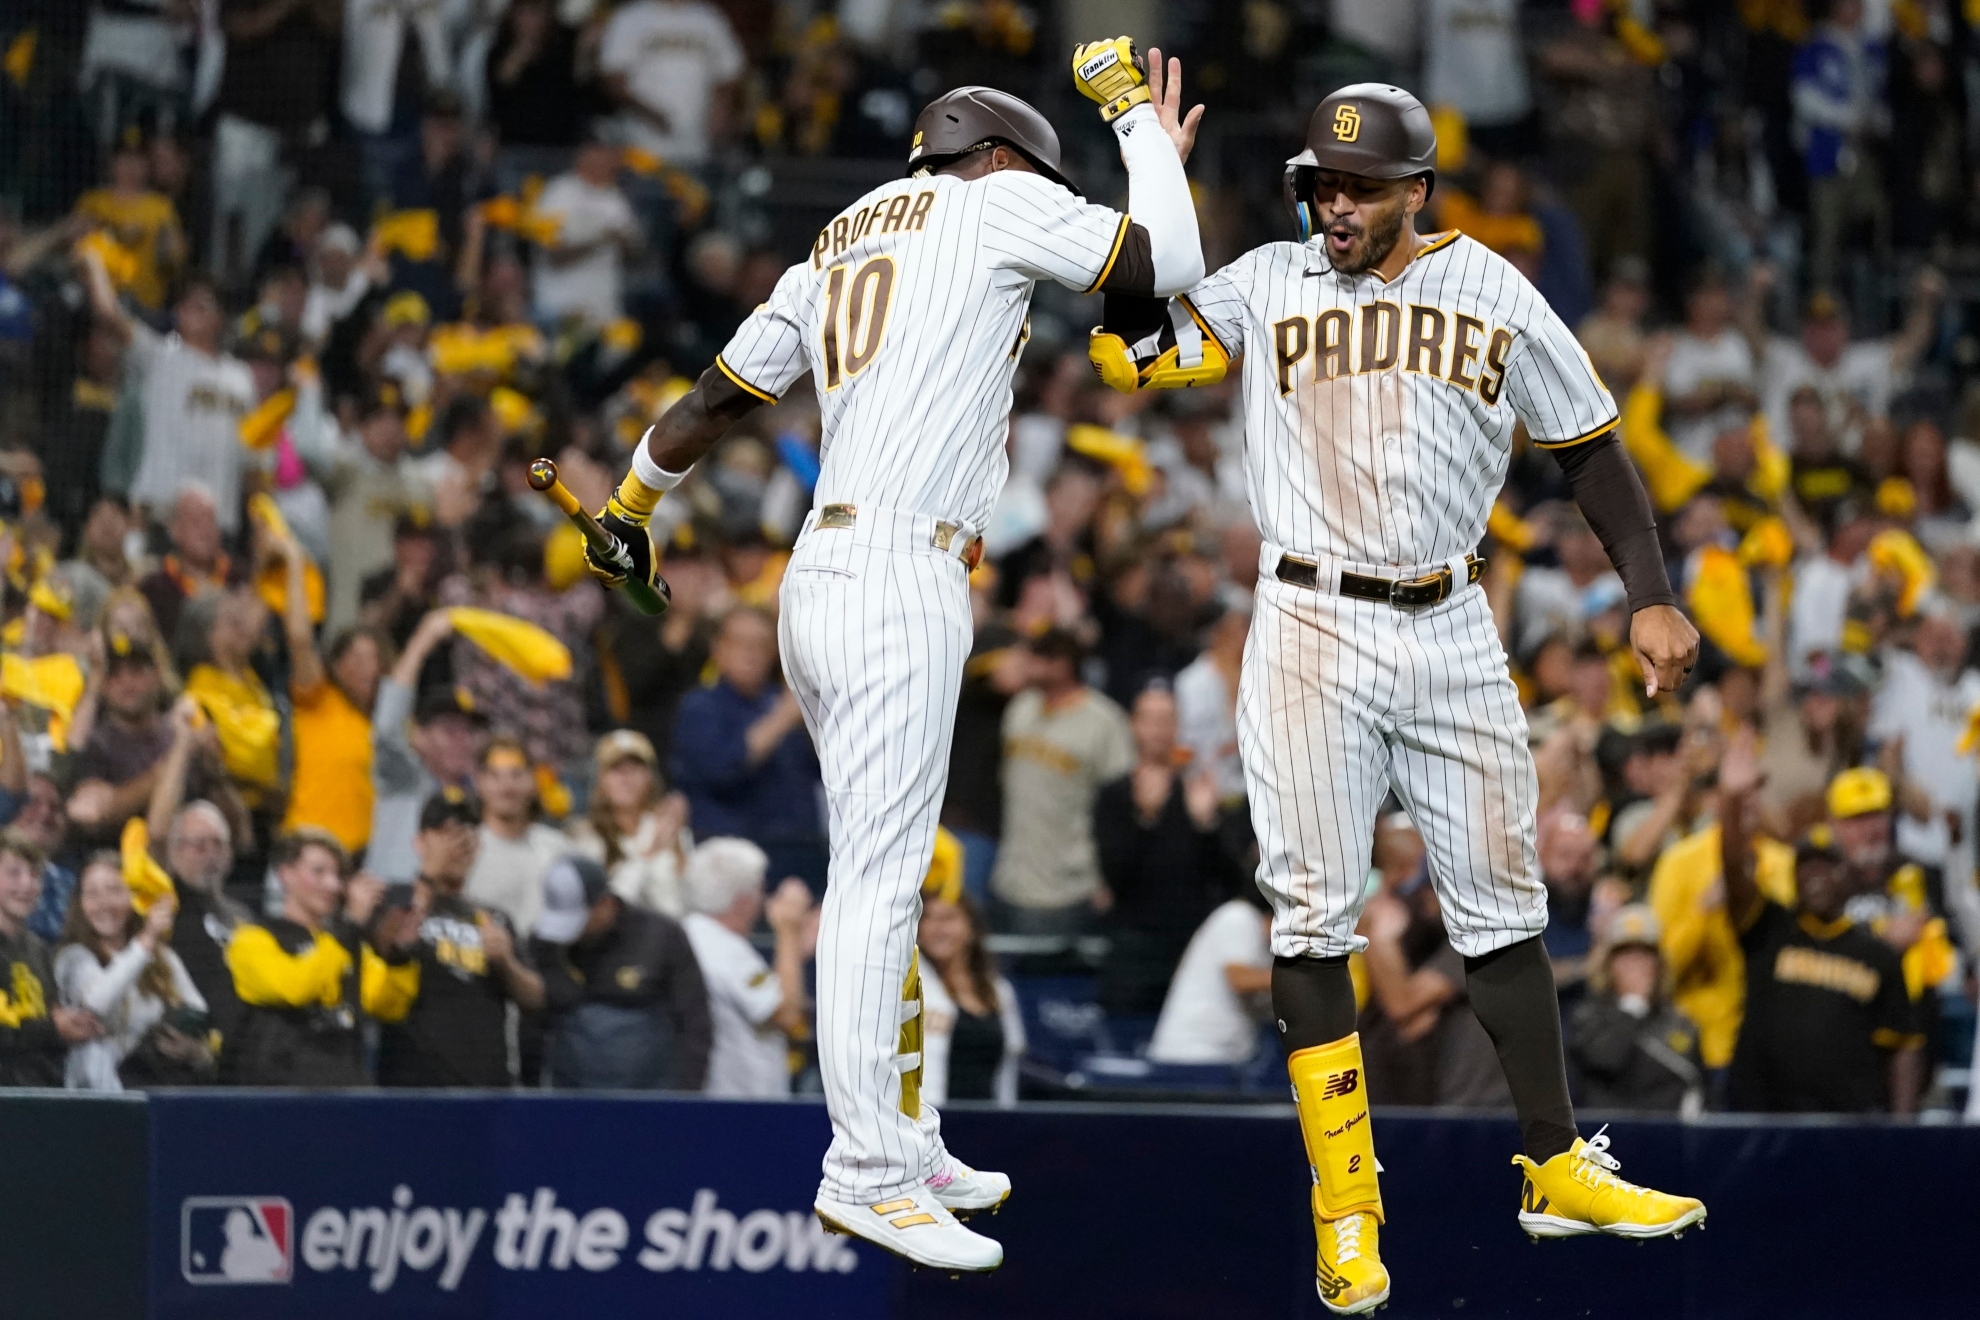 San Diego Padres' Trent Grisham, right, celebrates with teammate Jurickson Profar after hitting a home run during the fourth inning in Game 3 of a baseball NL Division Series against the Los Angeles Dodgers, Friday, Oct. 14, 2022, in San Diego. / AP